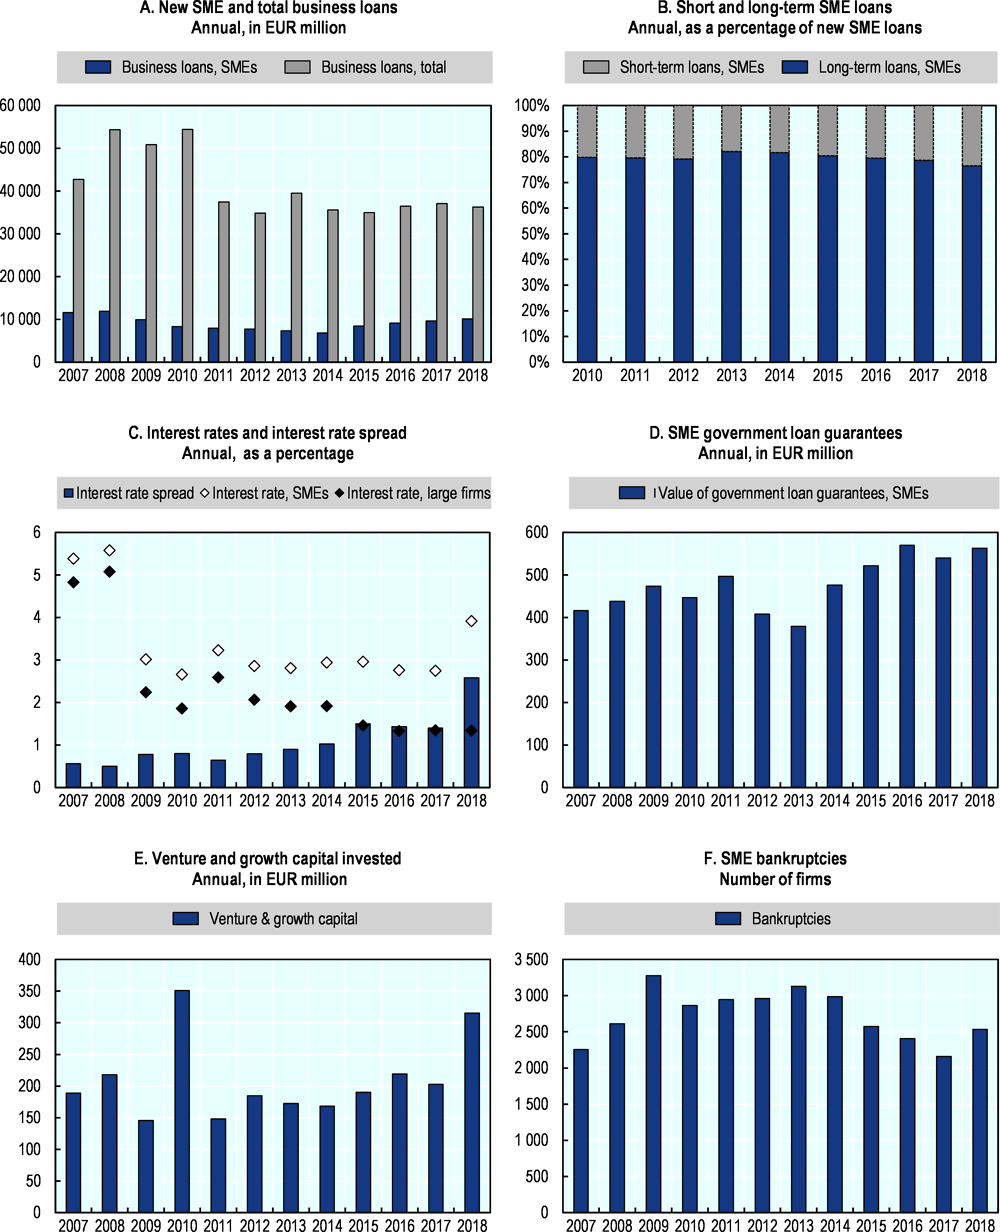 Figure 14.1. Trends in SME and entrepreneurship finance in Finland